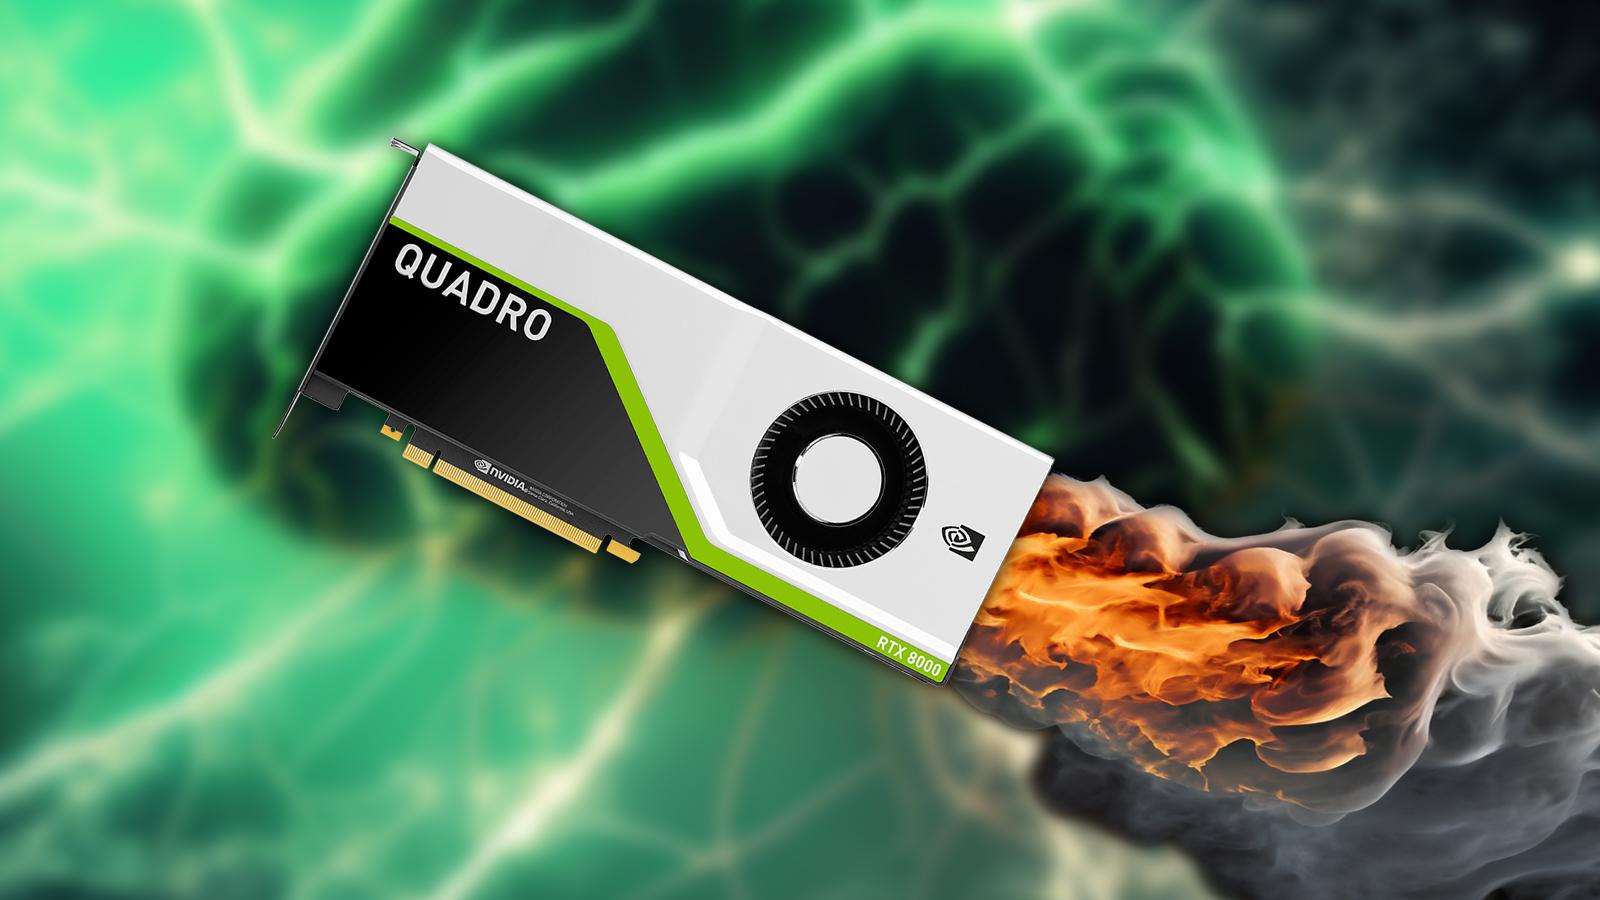 Quadro Nvidia GPU flying through the air with a background of a green cloud with neurons to represent ai